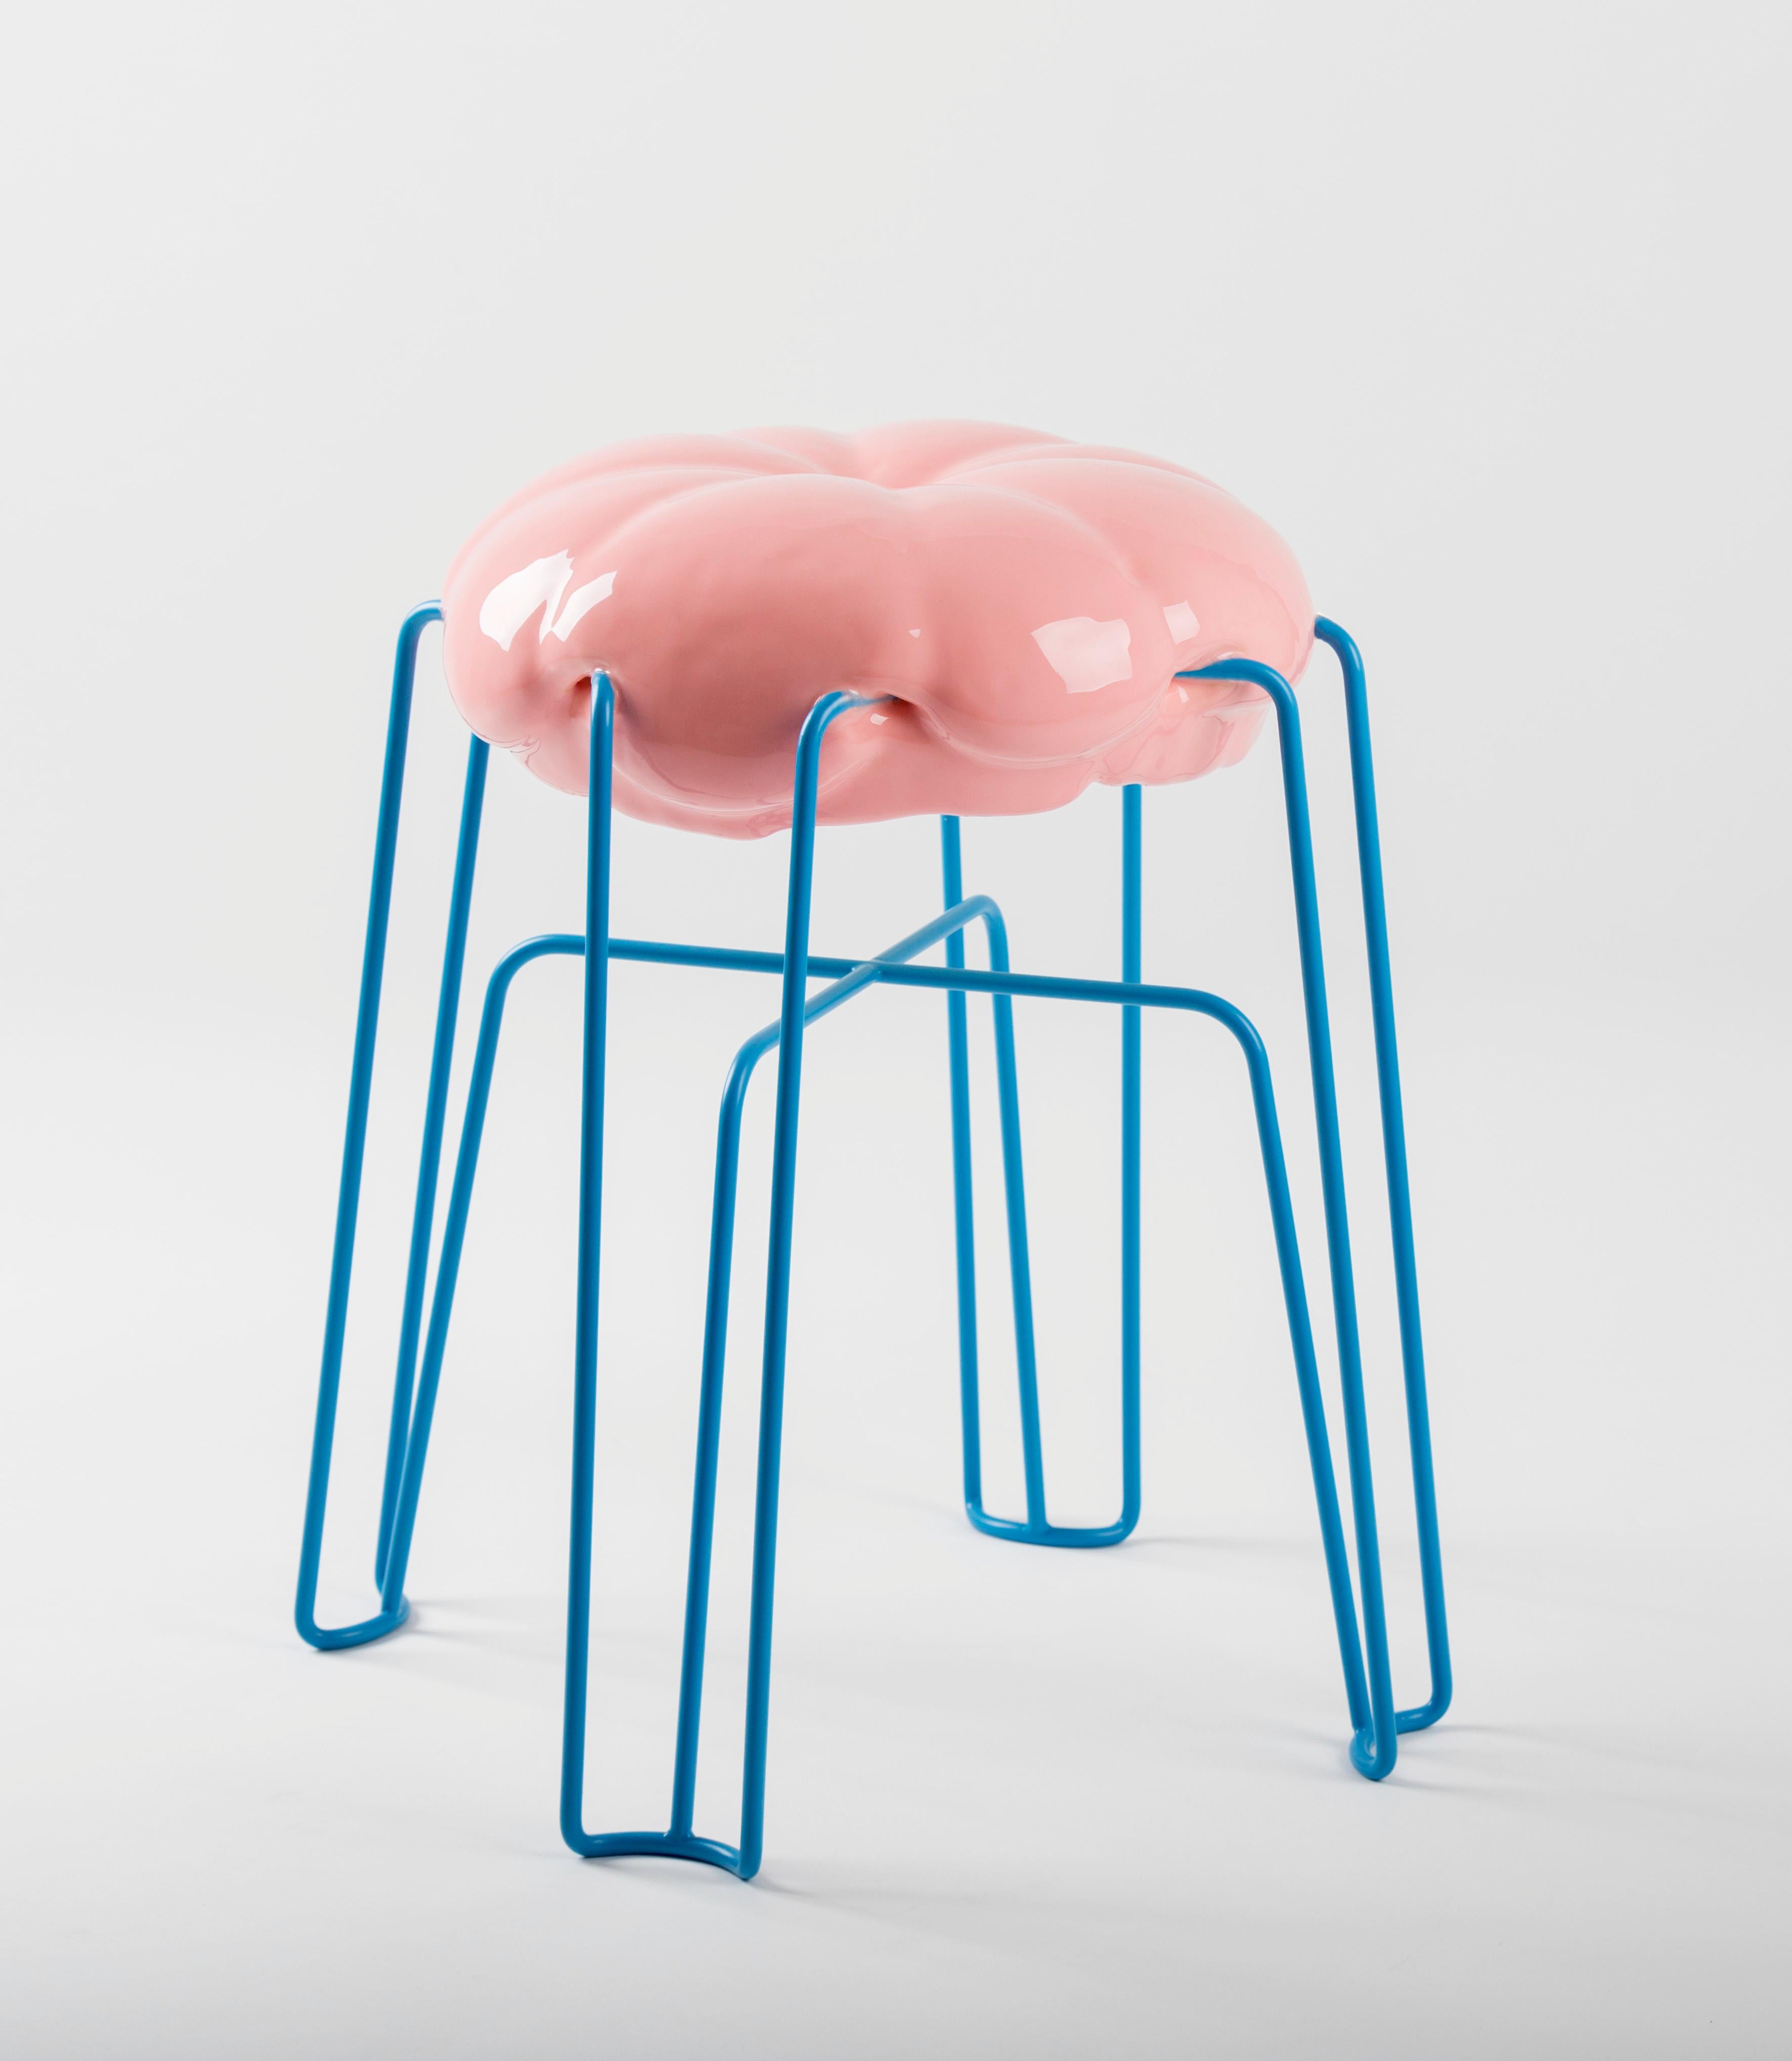 Marshmallow Stool by Paul Ketz in Sugarpink Polyurethane Foam and Steel In Excellent Condition For Sale In New York, NY